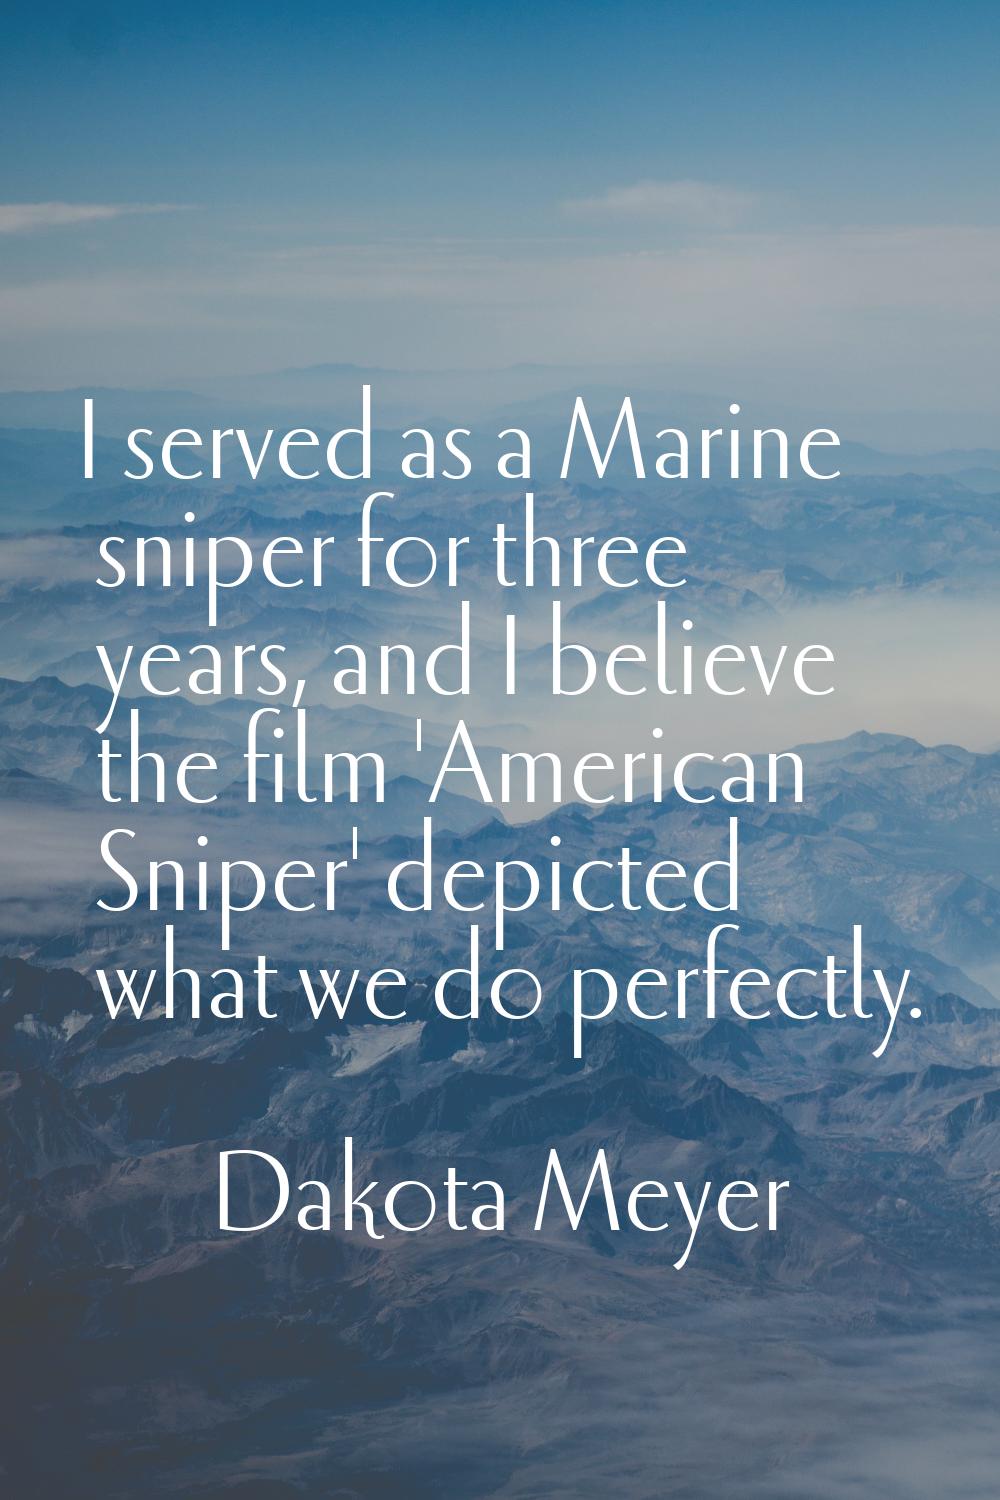 I served as a Marine sniper for three years, and I believe the film 'American Sniper' depicted what